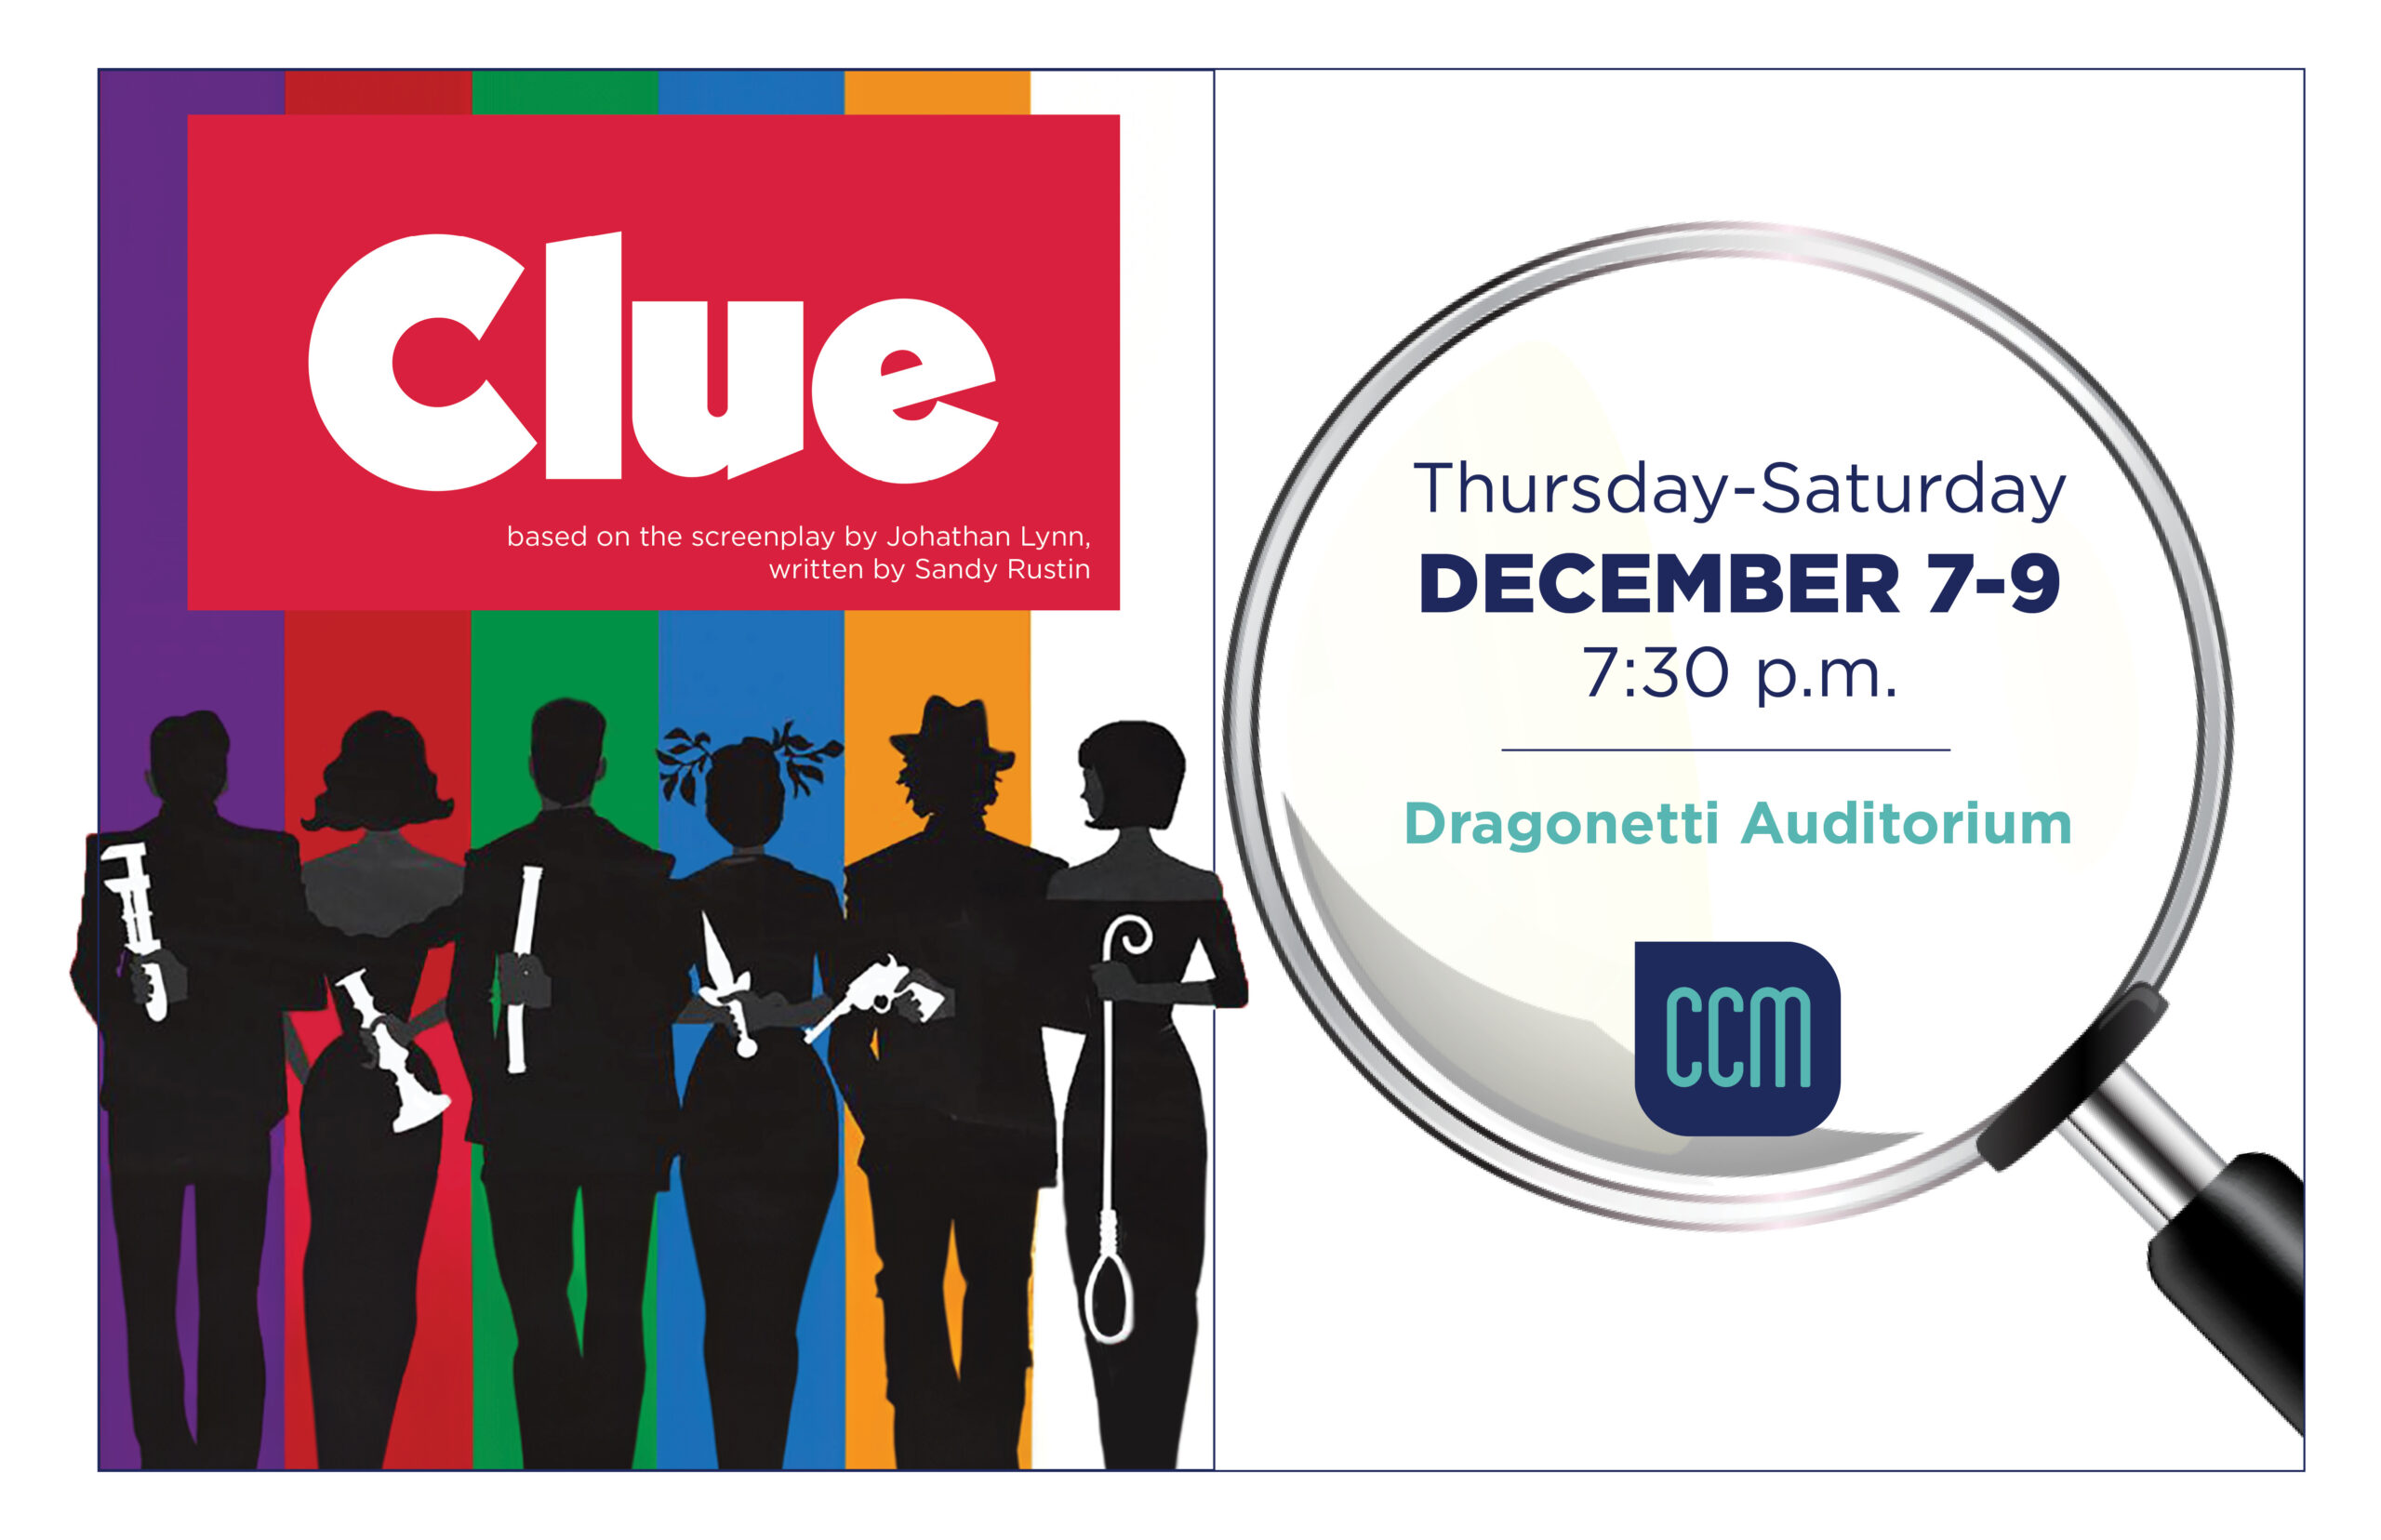 “Clue” at CCM is the Comedy Whodunit